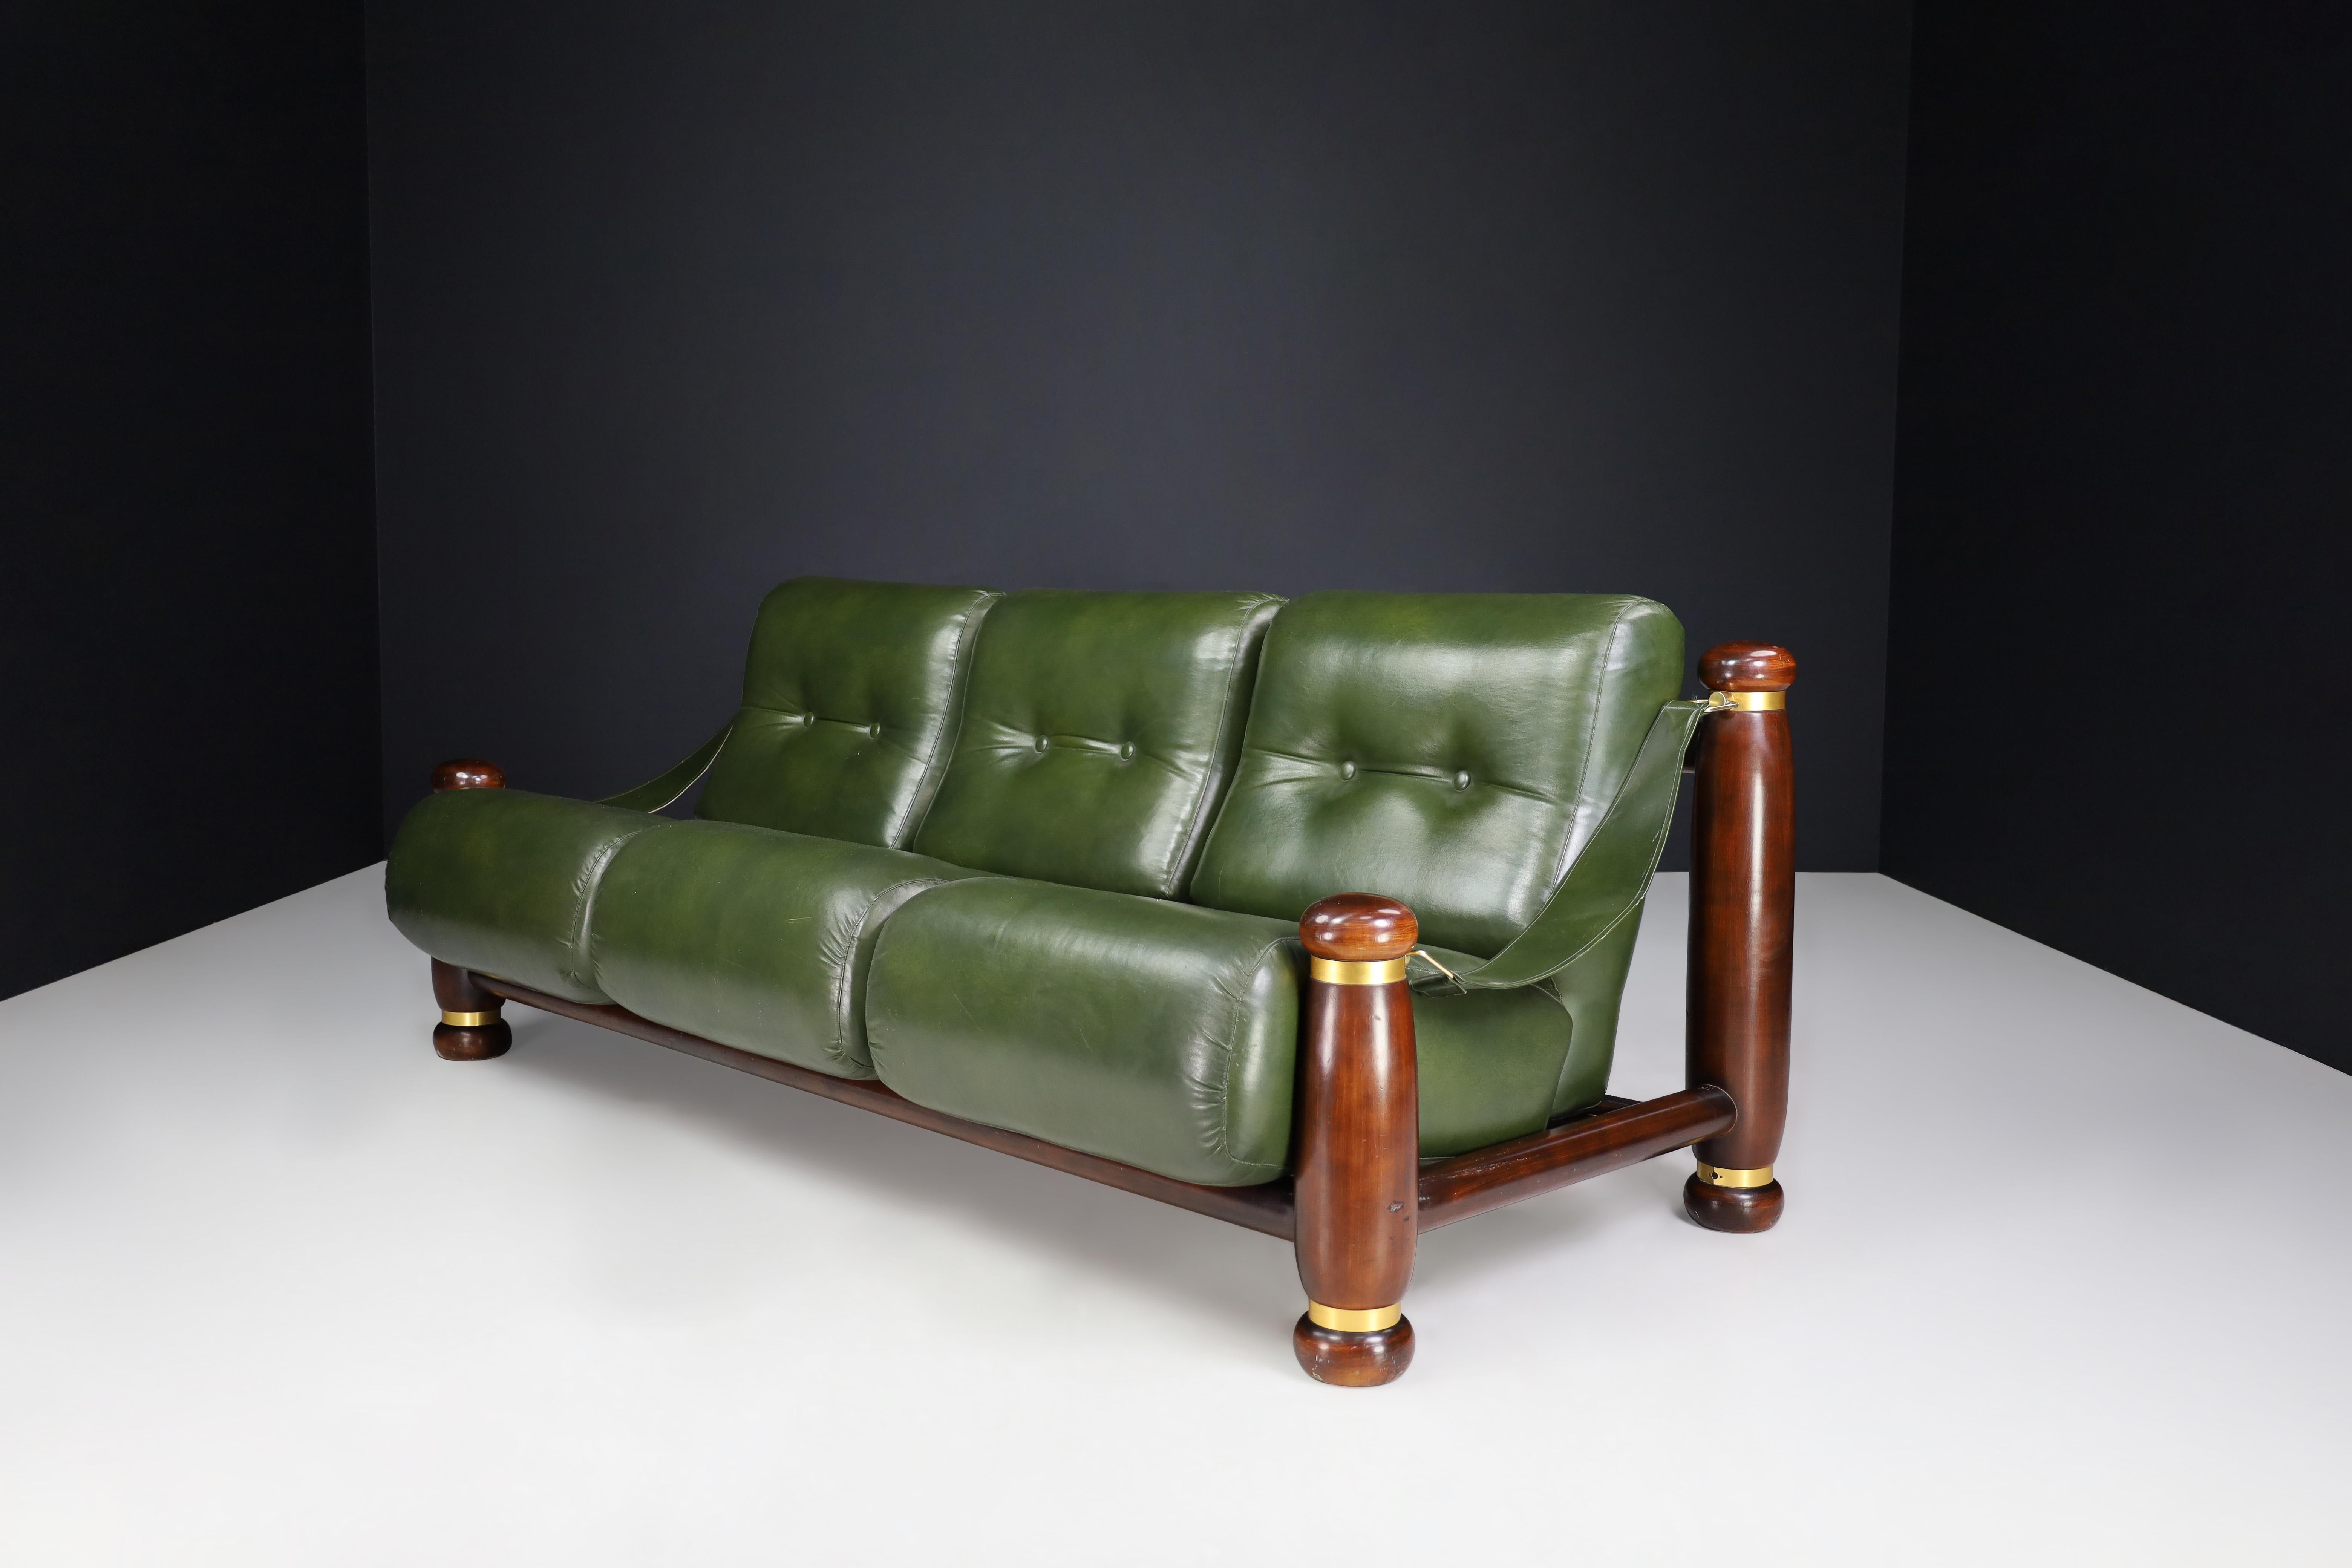 Mid-Century Modern Walnut, Brass, and Green Leather Three-Seat Sofa from, Italy, 1960s For Sale